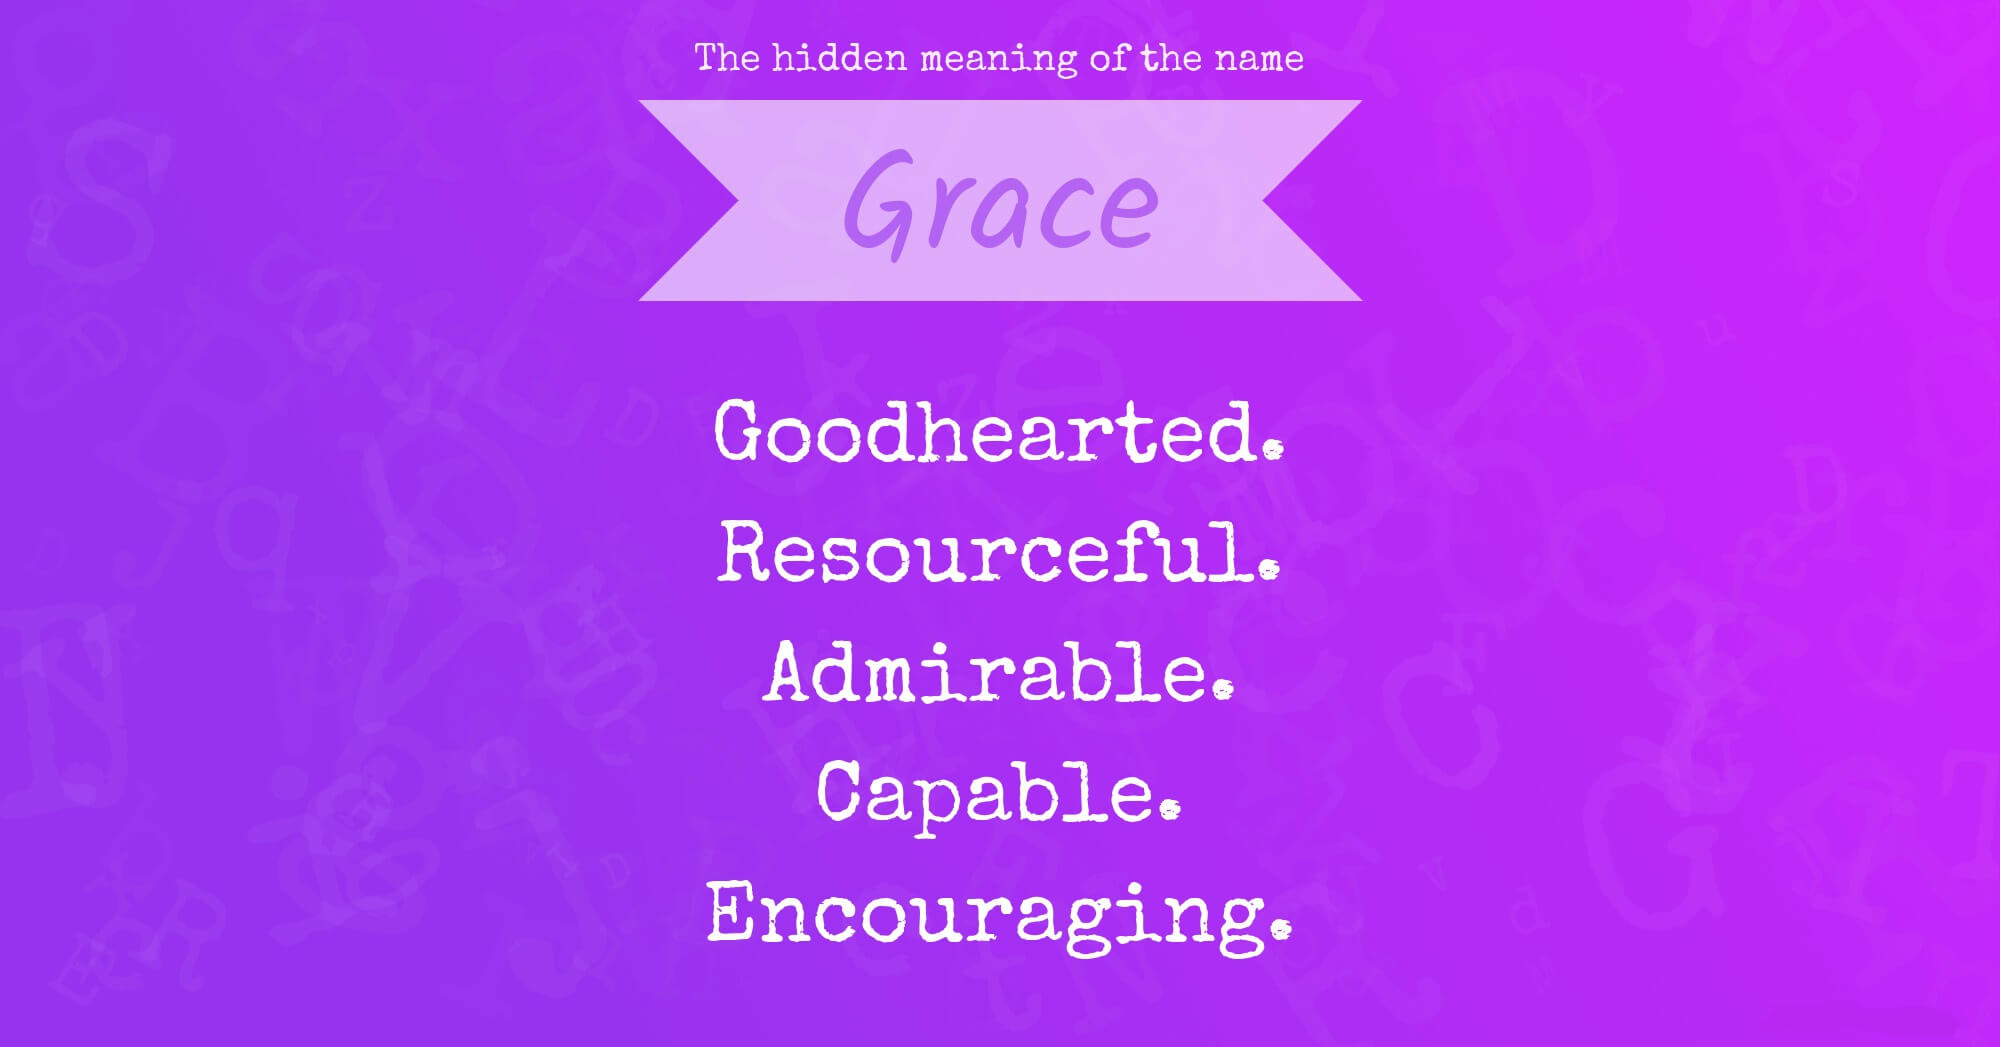 The Hidden Meaning of The Name Grace